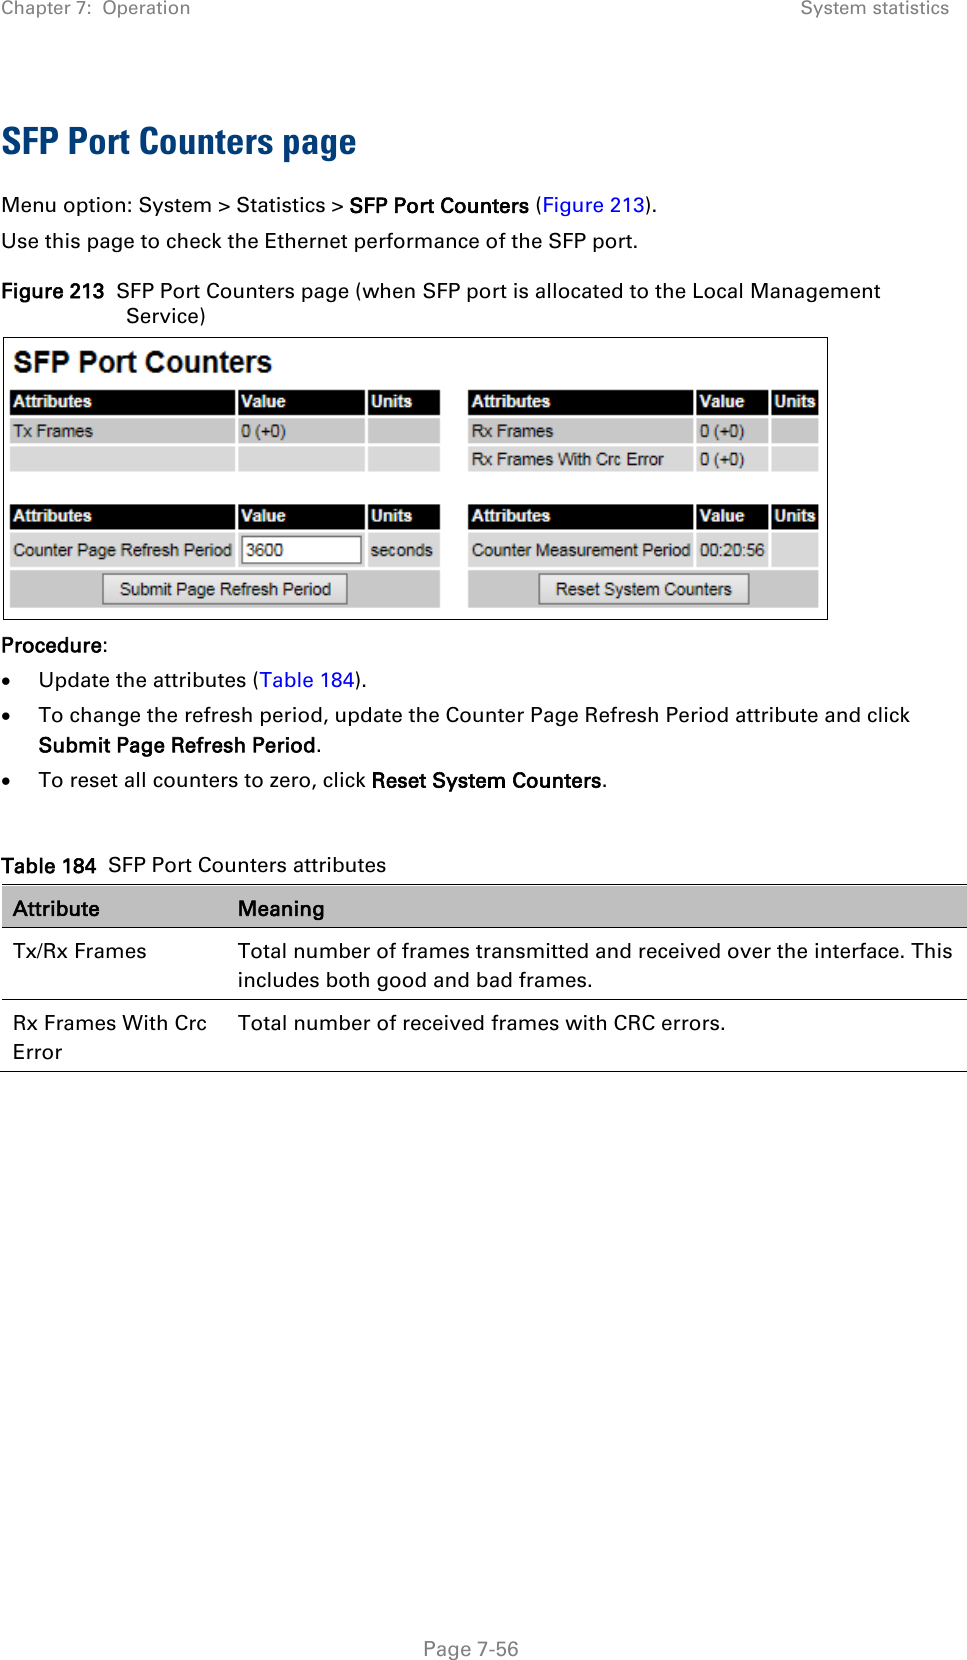 Chapter 7:  Operation System statistics  SFP Port Counters page Menu option: System &gt; Statistics &gt; SFP Port Counters (Figure 213). Use this page to check the Ethernet performance of the SFP port. Figure 213  SFP Port Counters page (when SFP port is allocated to the Local Management Service)  Procedure: • Update the attributes (Table 184). • To change the refresh period, update the Counter Page Refresh Period attribute and click Submit Page Refresh Period. • To reset all counters to zero, click Reset System Counters.  Table 184  SFP Port Counters attributes Attribute Meaning Tx/Rx Frames  Total number of frames transmitted and received over the interface. This includes both good and bad frames. Rx Frames With Crc Error Total number of received frames with CRC errors.      Page 7-56 